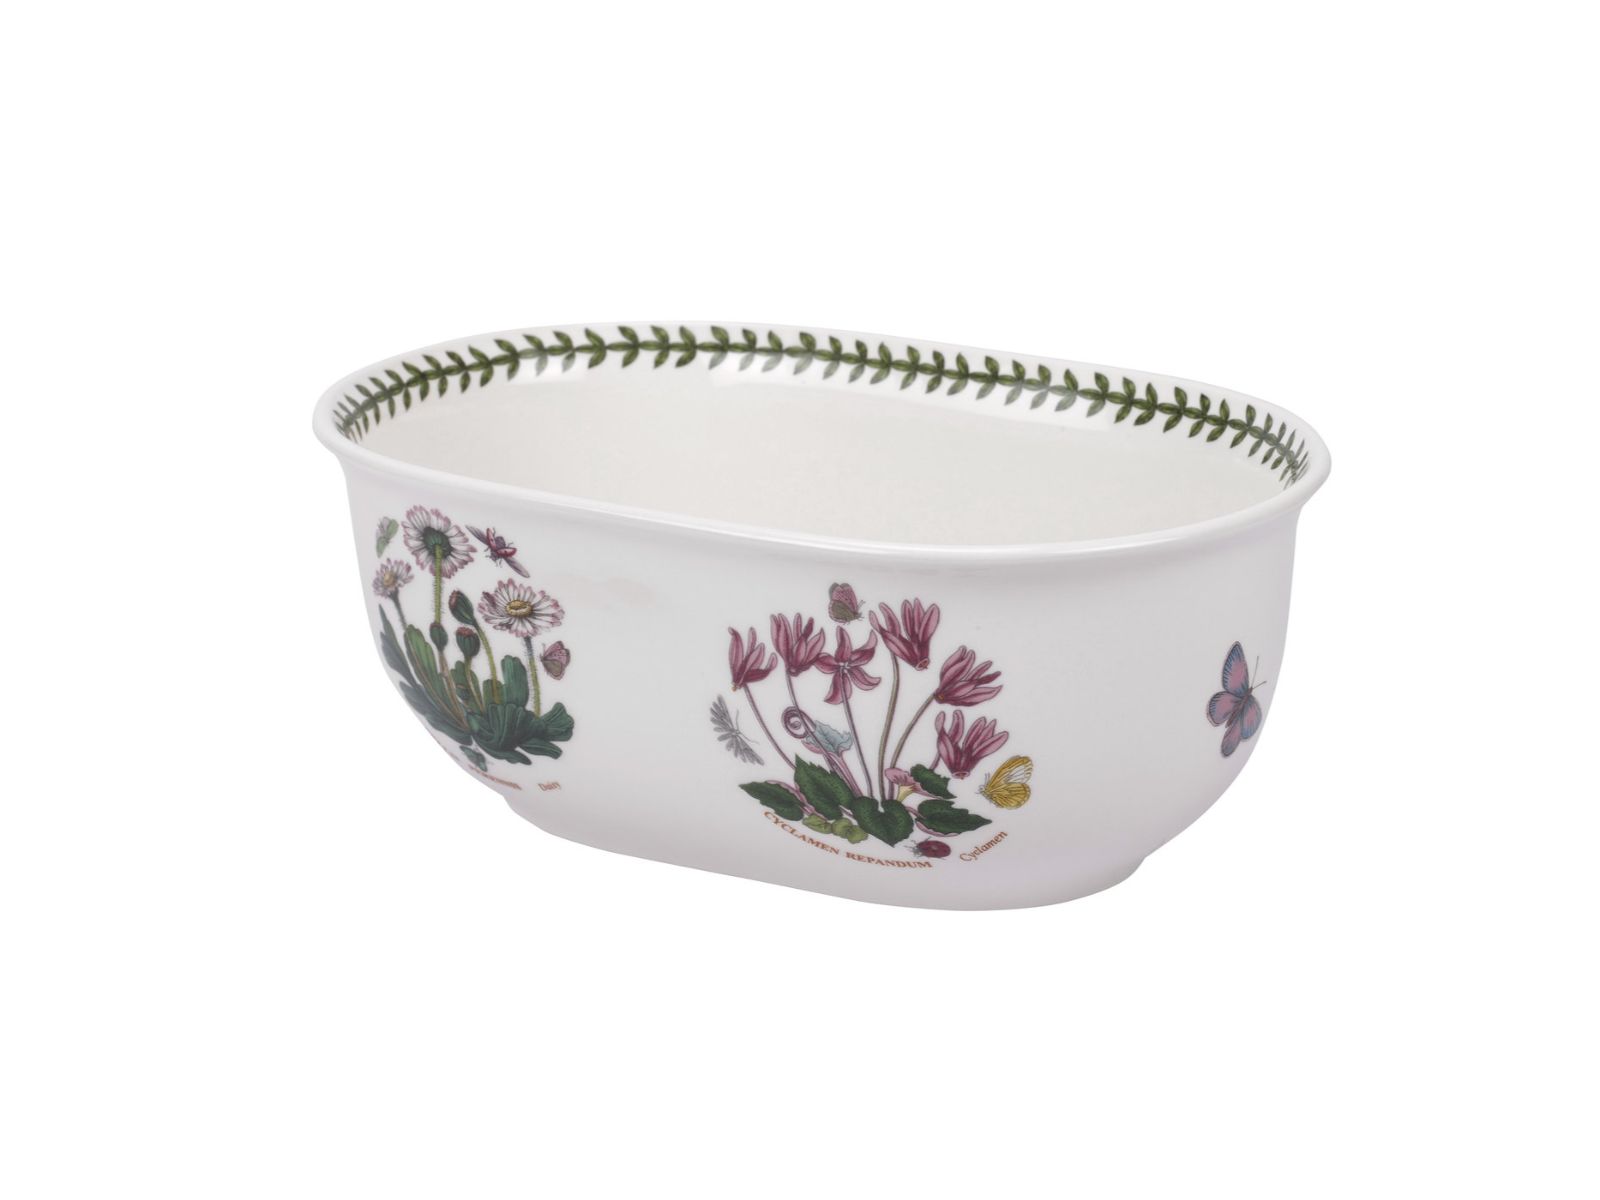 A white porcelain oval bulb pot with a laurel wreath rim and various floral designs on the outside